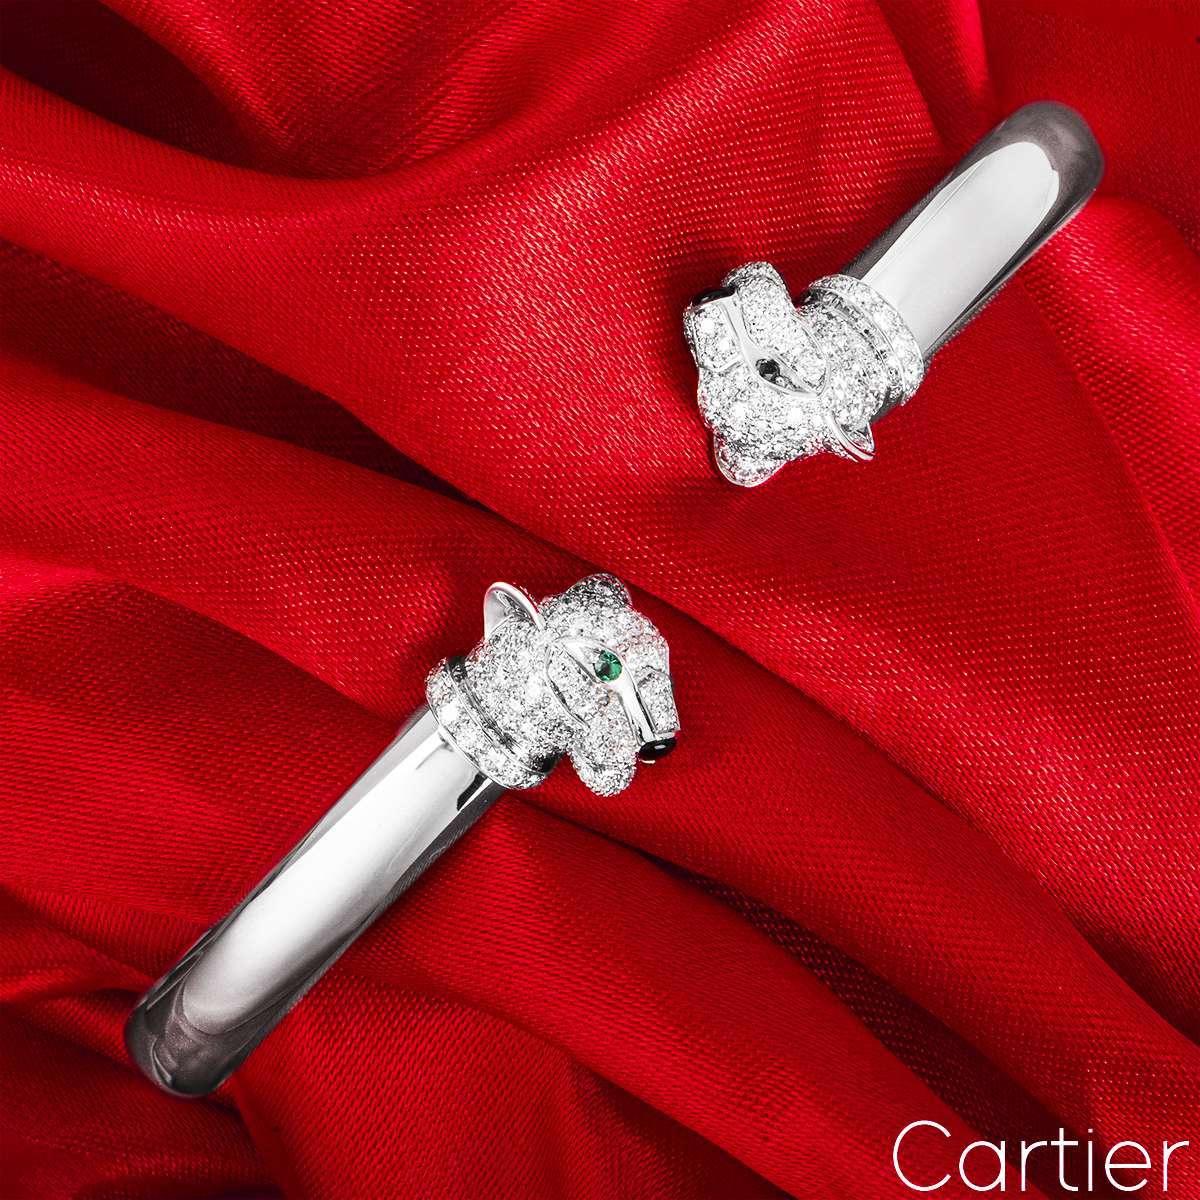 An 18k white gold cuff bracelet by Cartier, from the Panthère de Cartier collection. The piece comprises of two panther heads opposite each other, pave set with 194 round brilliant cut diamonds with a total weight of 1.37ct. Further complementing